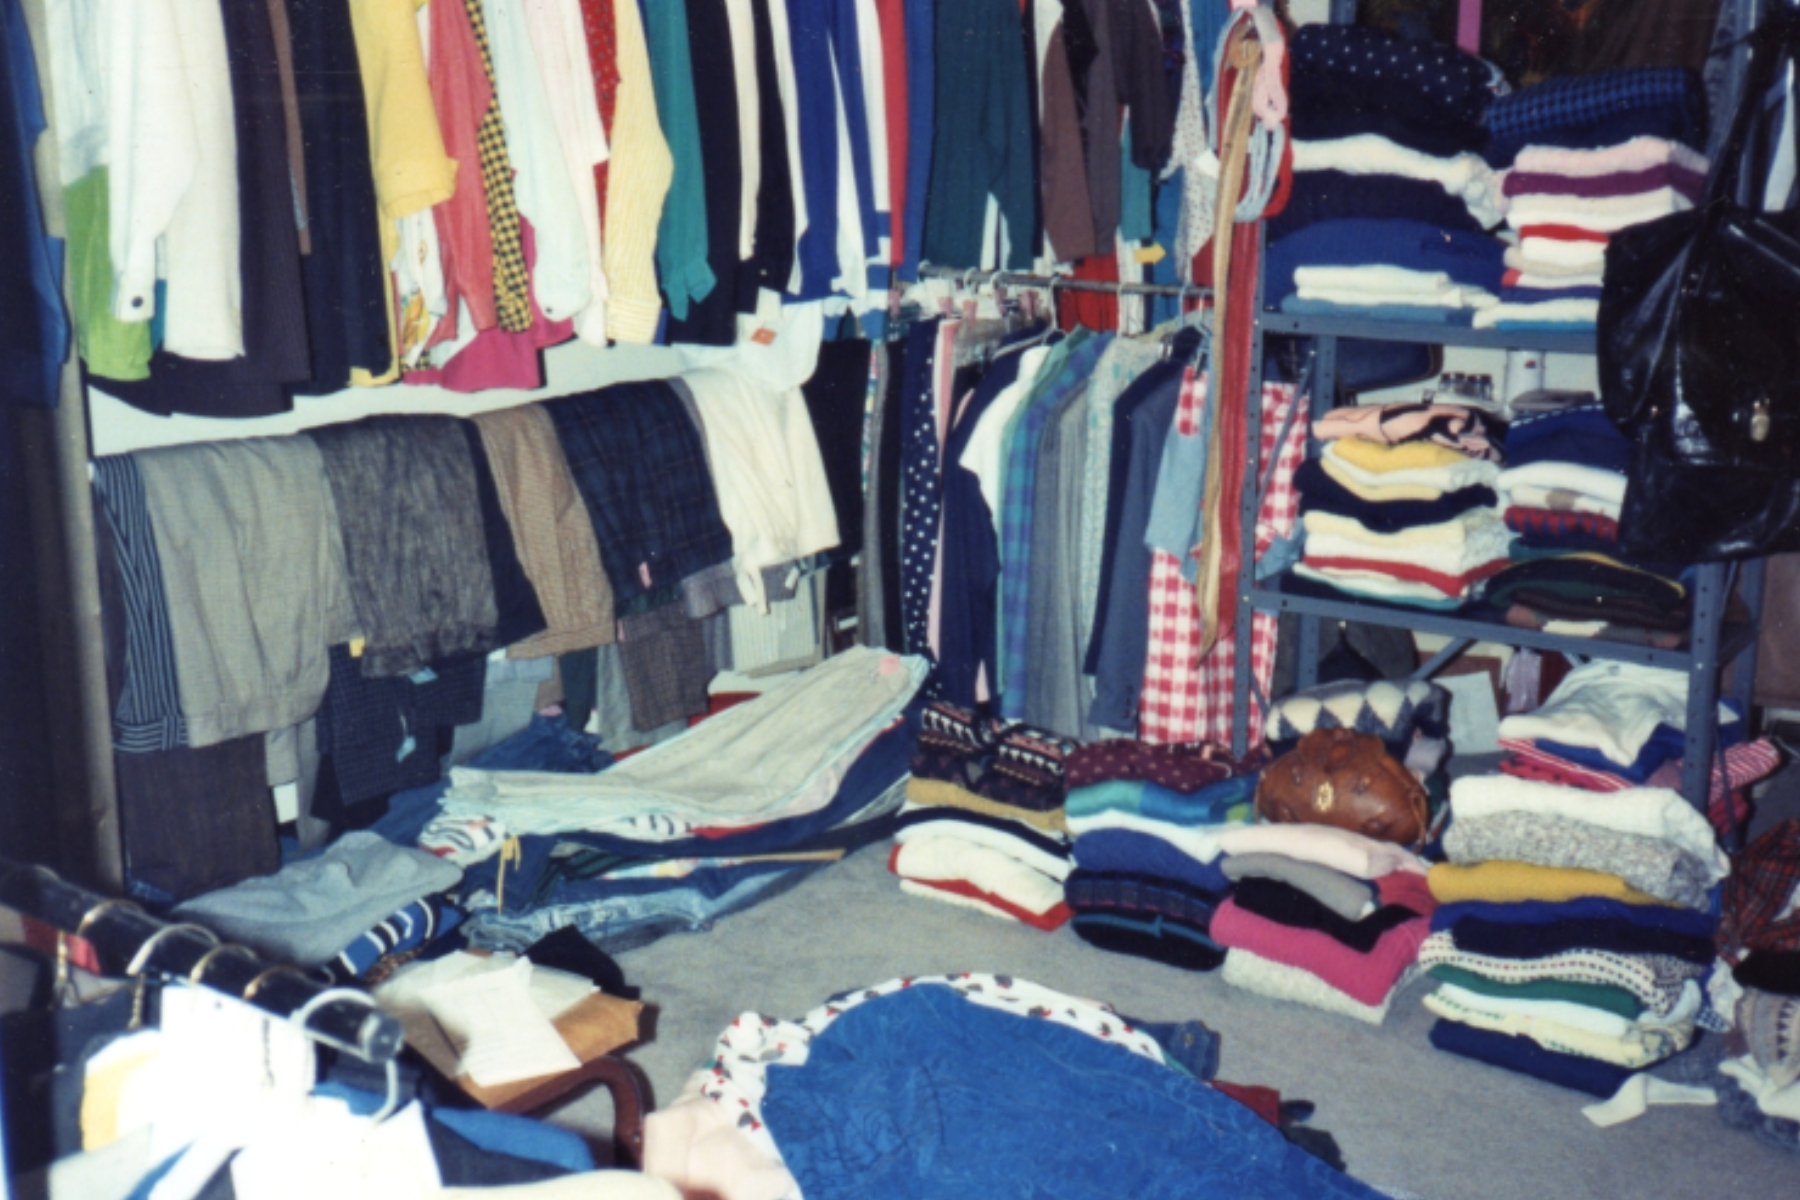 Different styles of clothes displayed at a garage sale